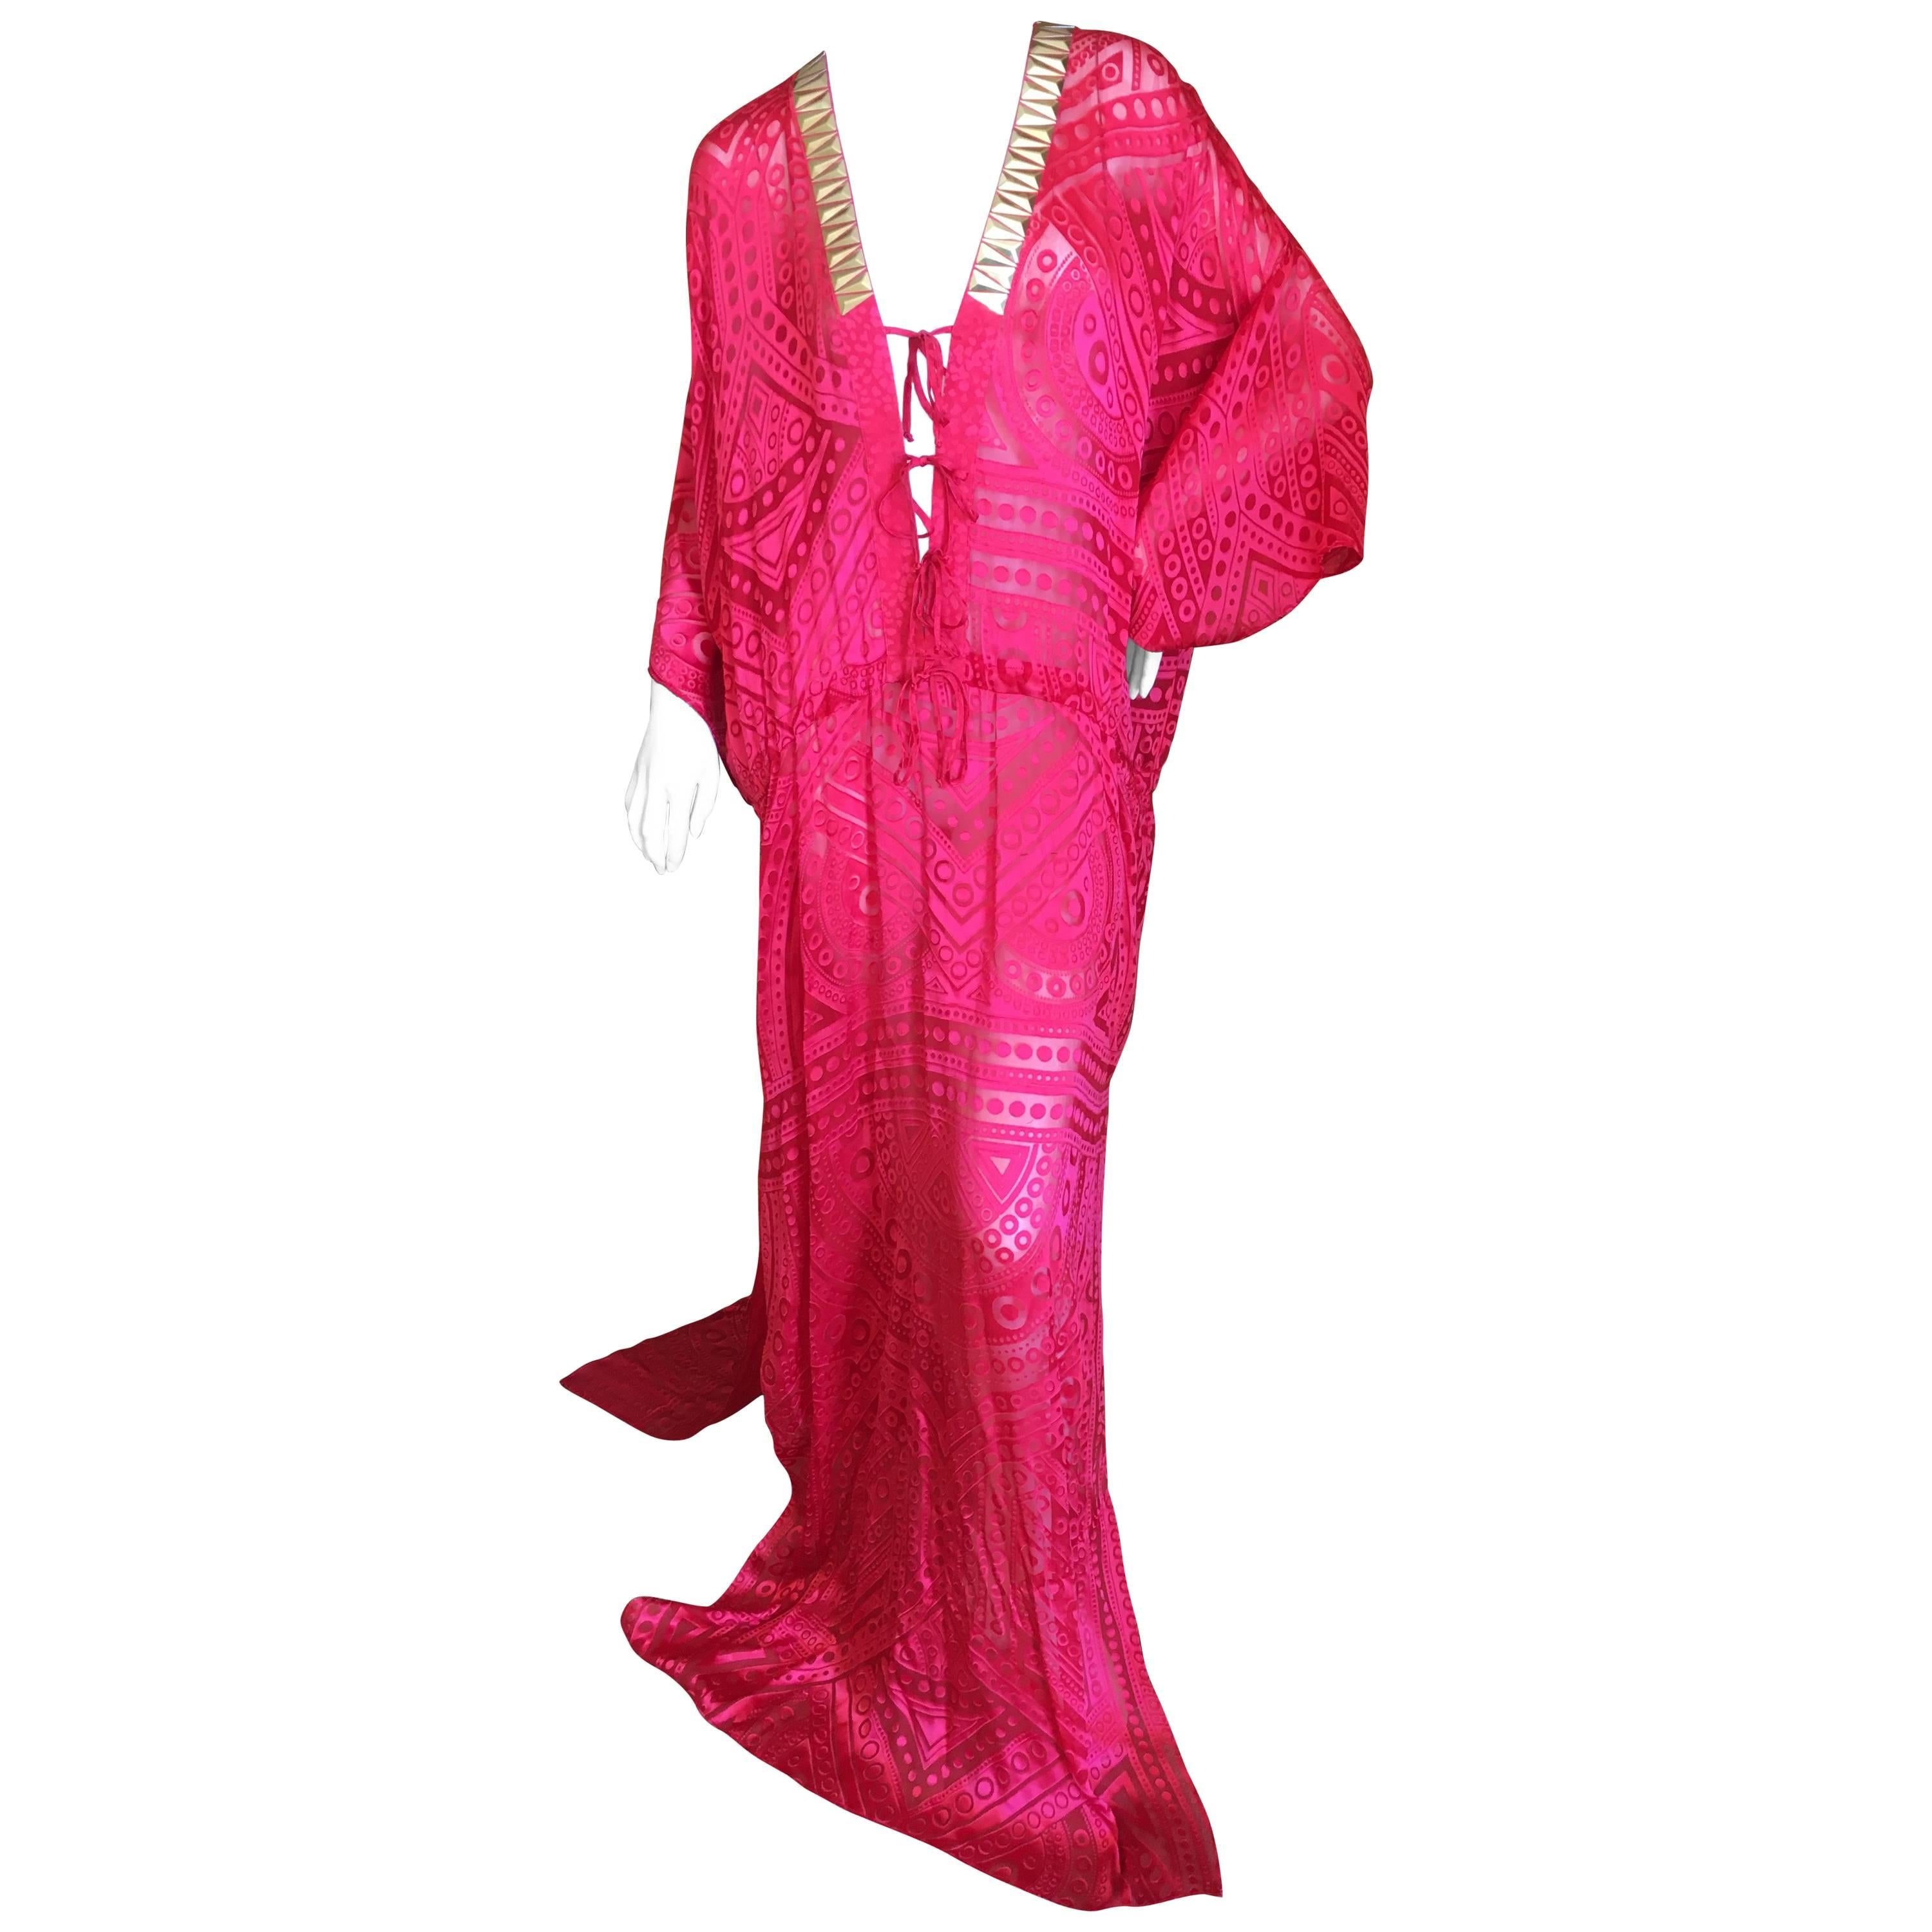 Roberto Cavalli Sheer Red Caftan with Gold Embellishents for Just Cavalli NWT